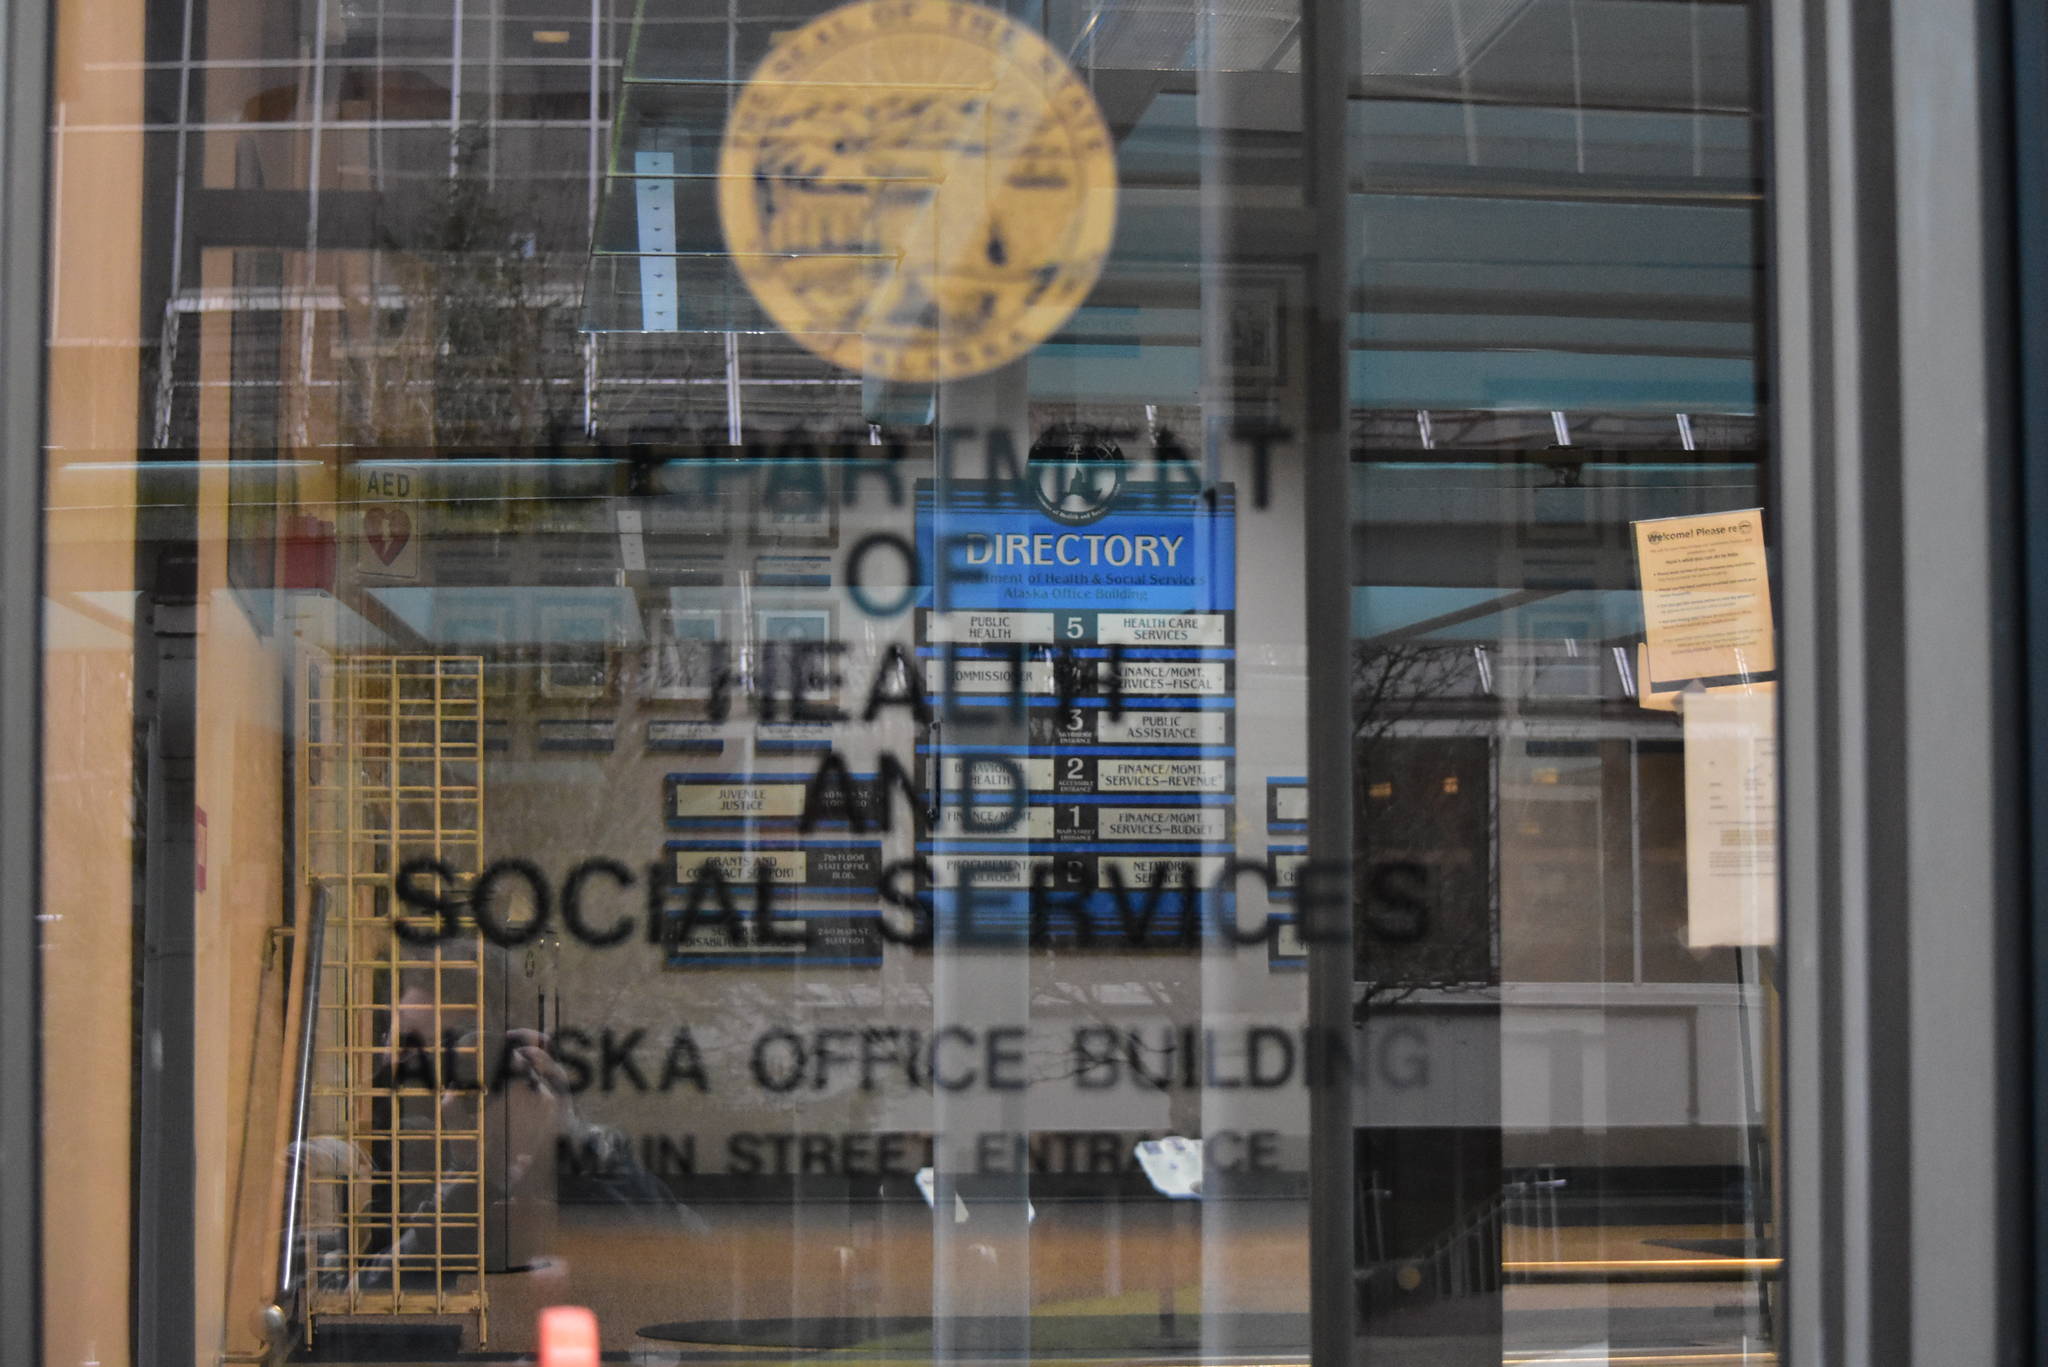 The entrance to the Alaska Department of Health and Social Services building in downtown Juneau. Gov. Mike Dunleavy has proposed splitting the department to spread the administrative burden, but health care workers and tribal leaders say they weren’t consulted and Alaska Natives will likely be negatively impacted. (Peter Segall / Juneau Empire)